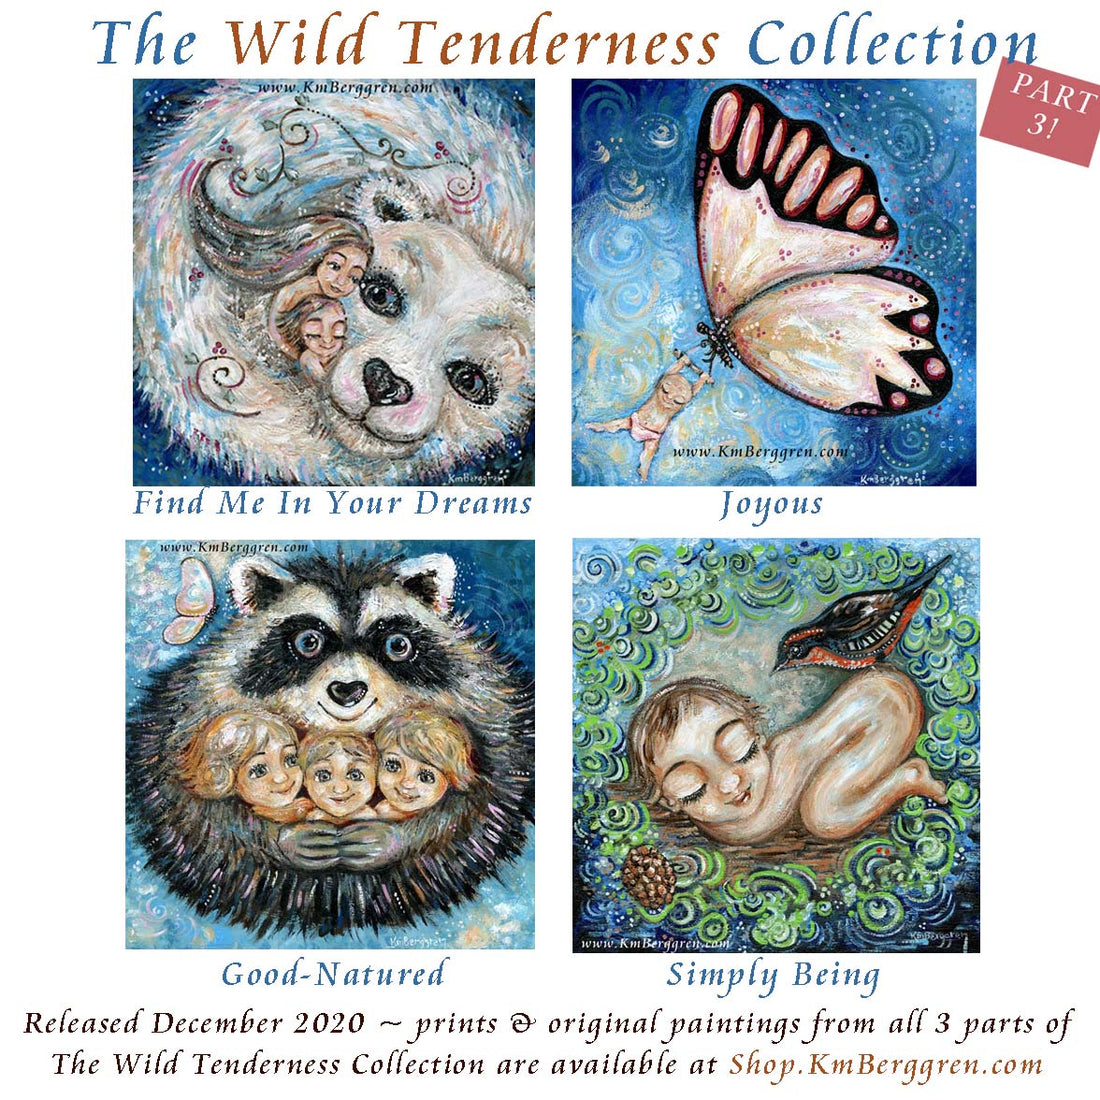 The Wild Tenderness Collection, Part 3, Has Been Released